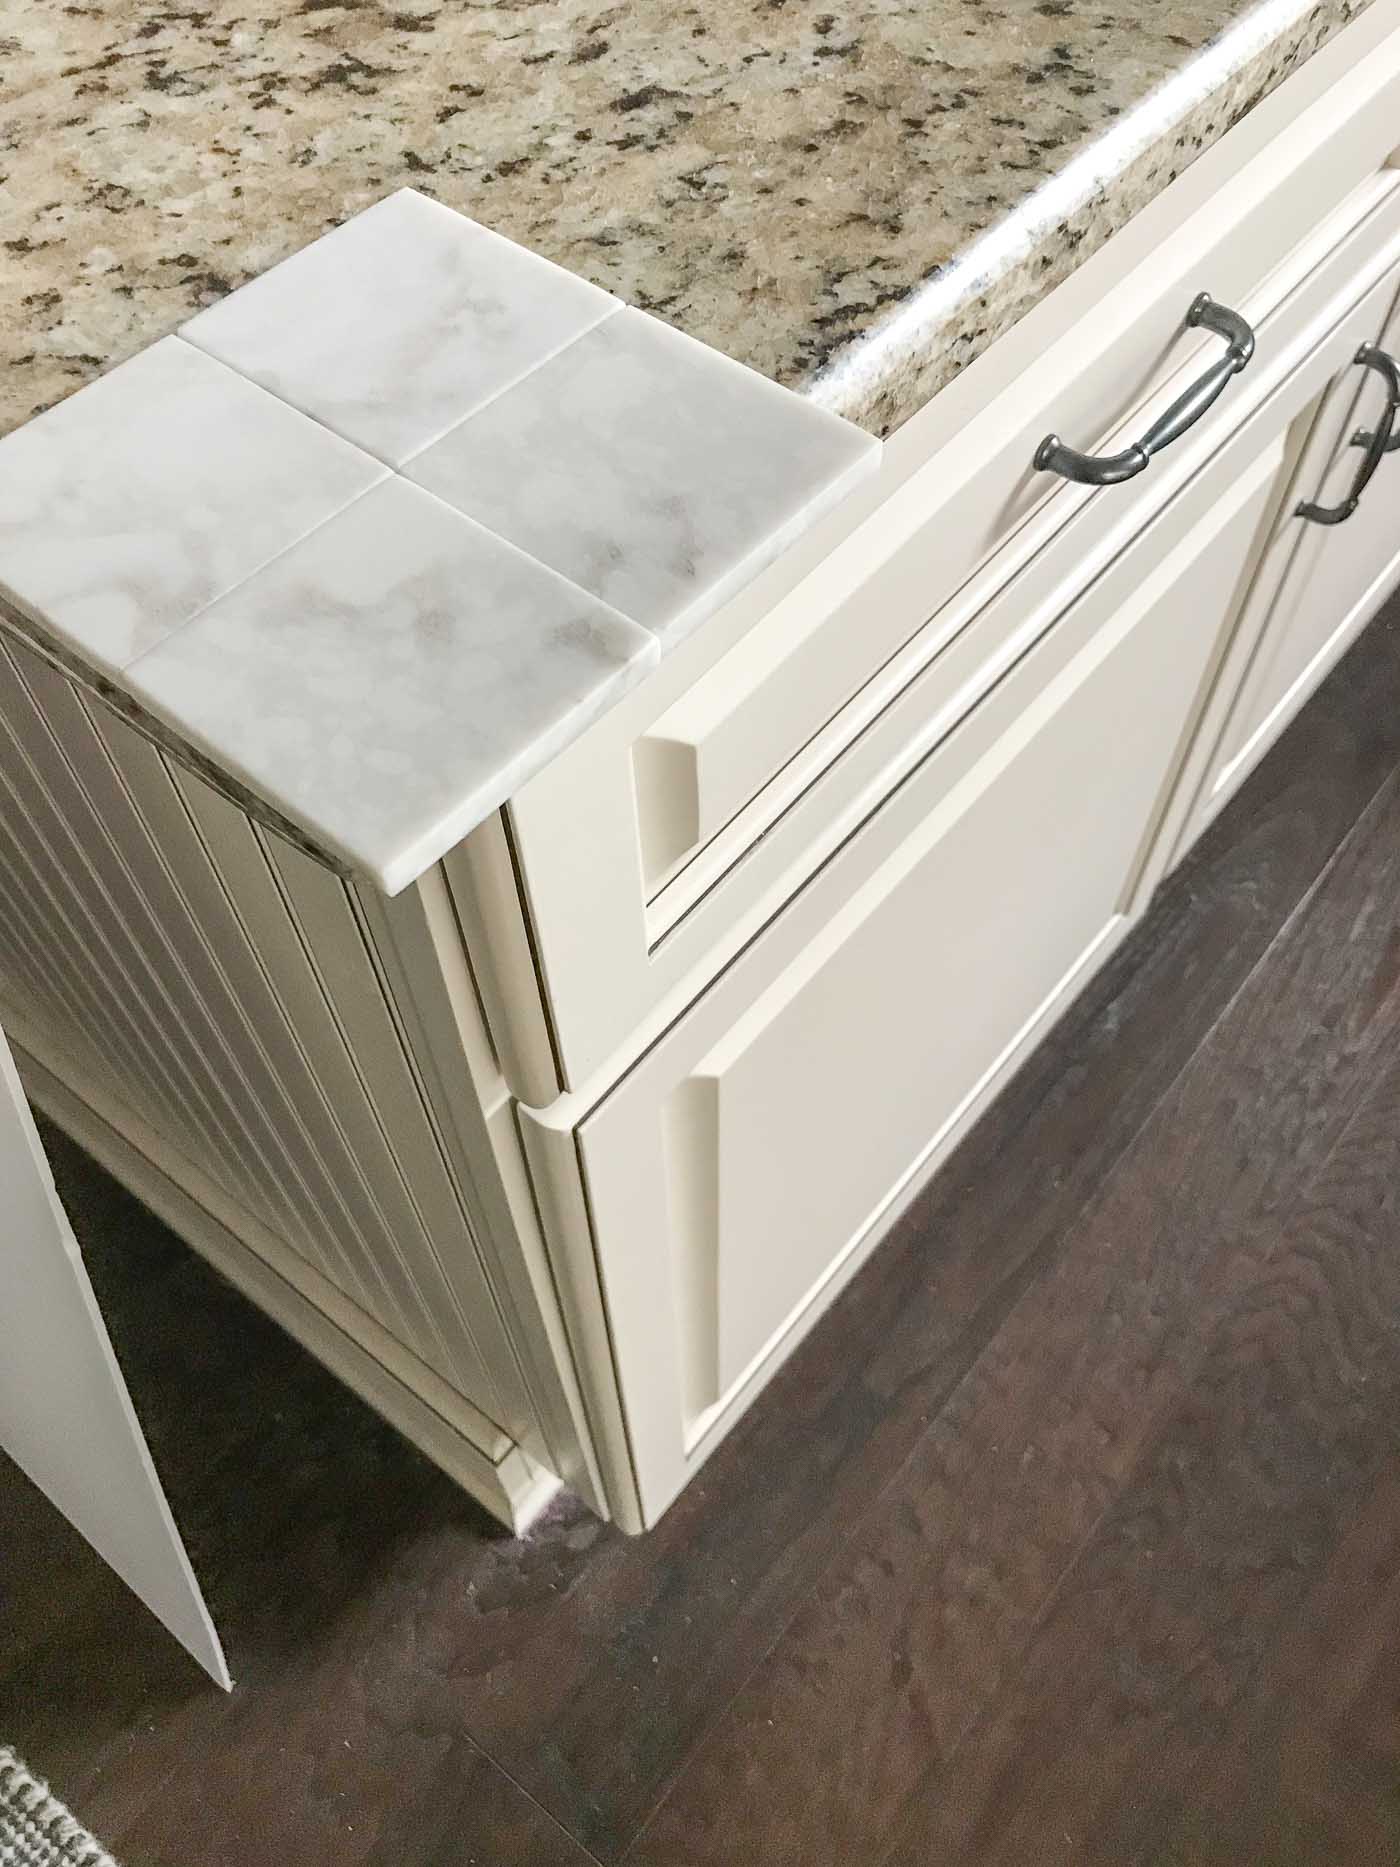 Cream Kitchen, What Color Countertops With Cream Cabinets